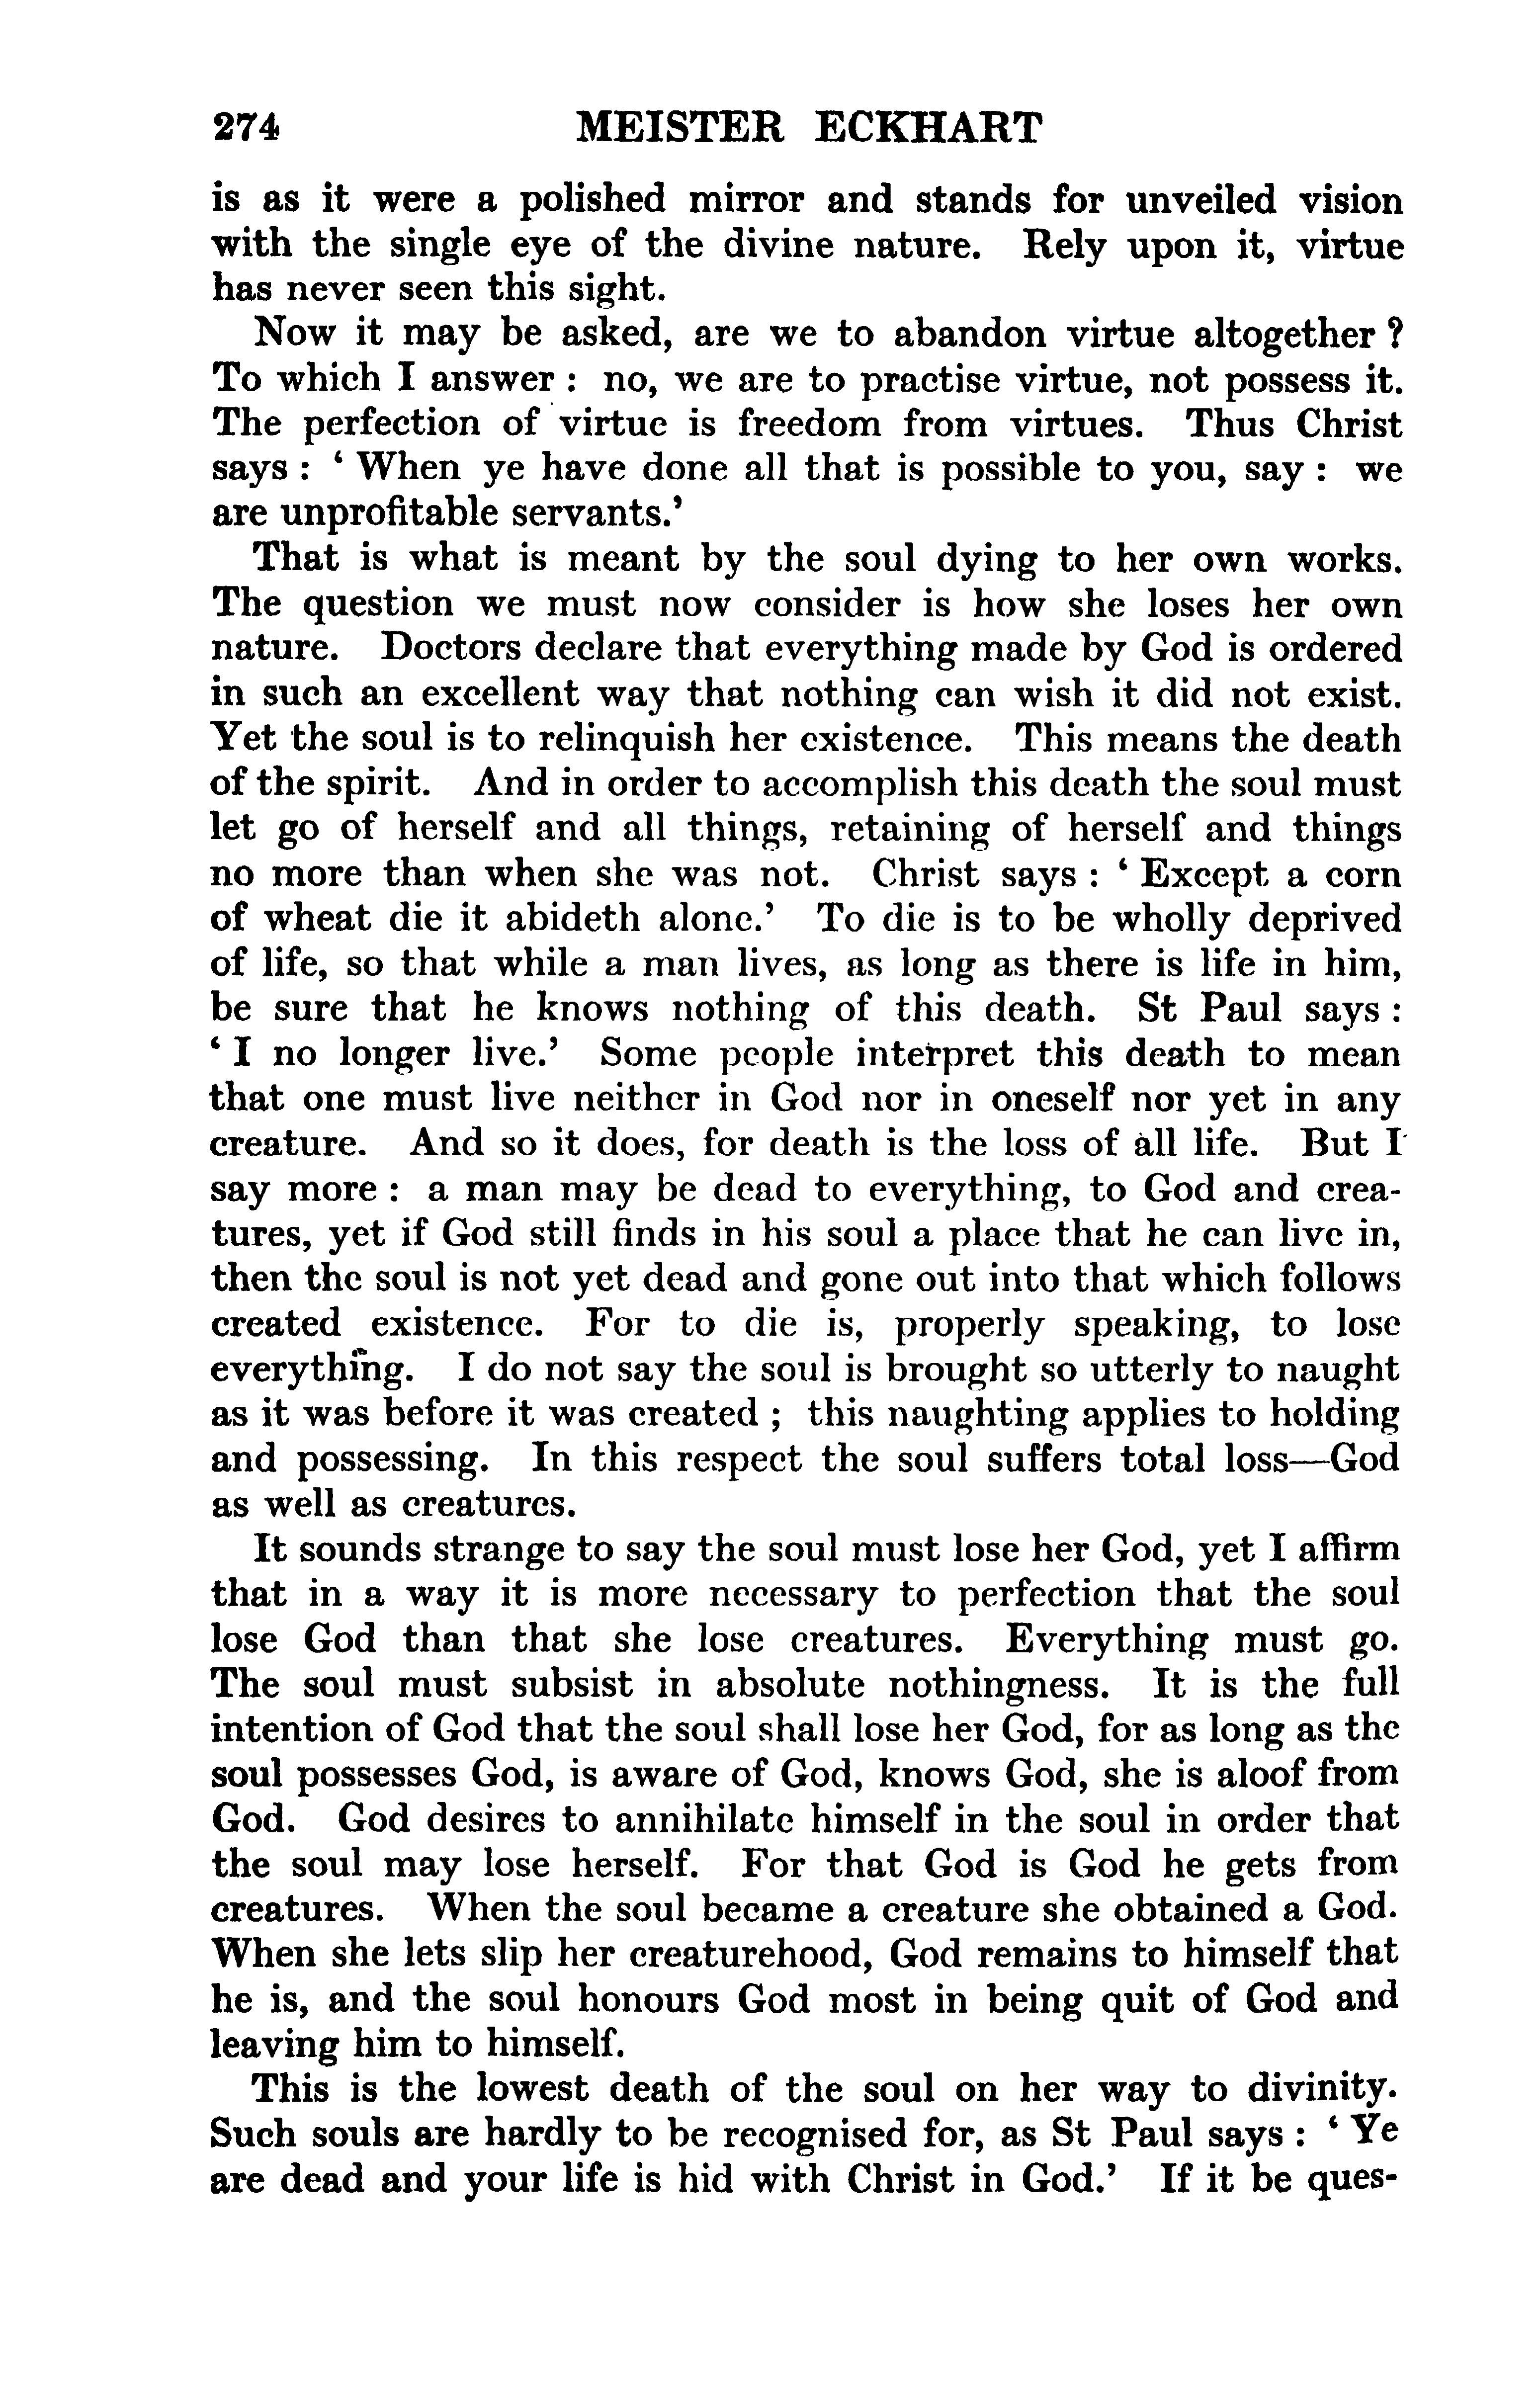 Image of page 0298